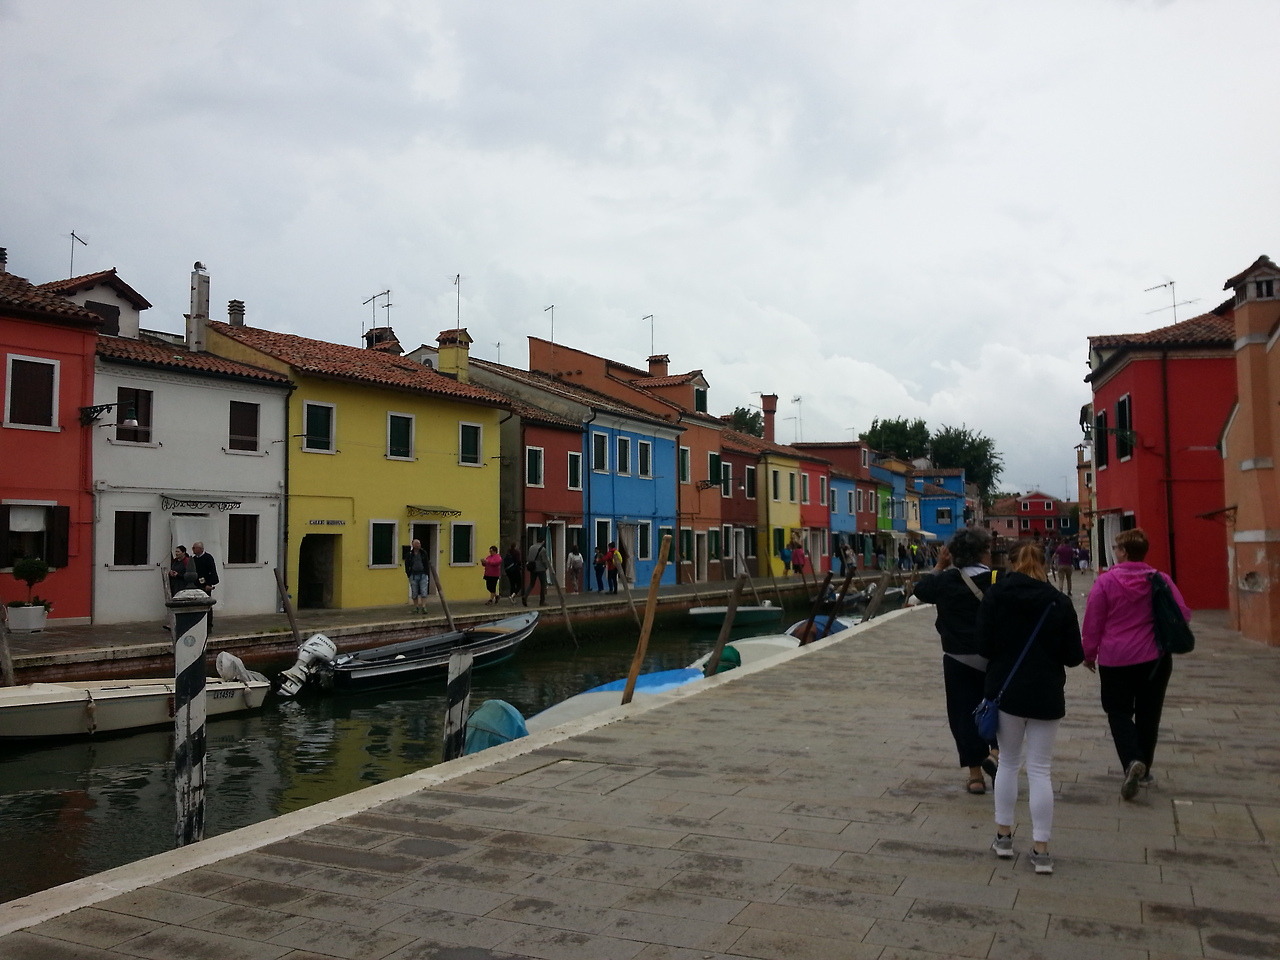 The streets of Burano, an island in Venice